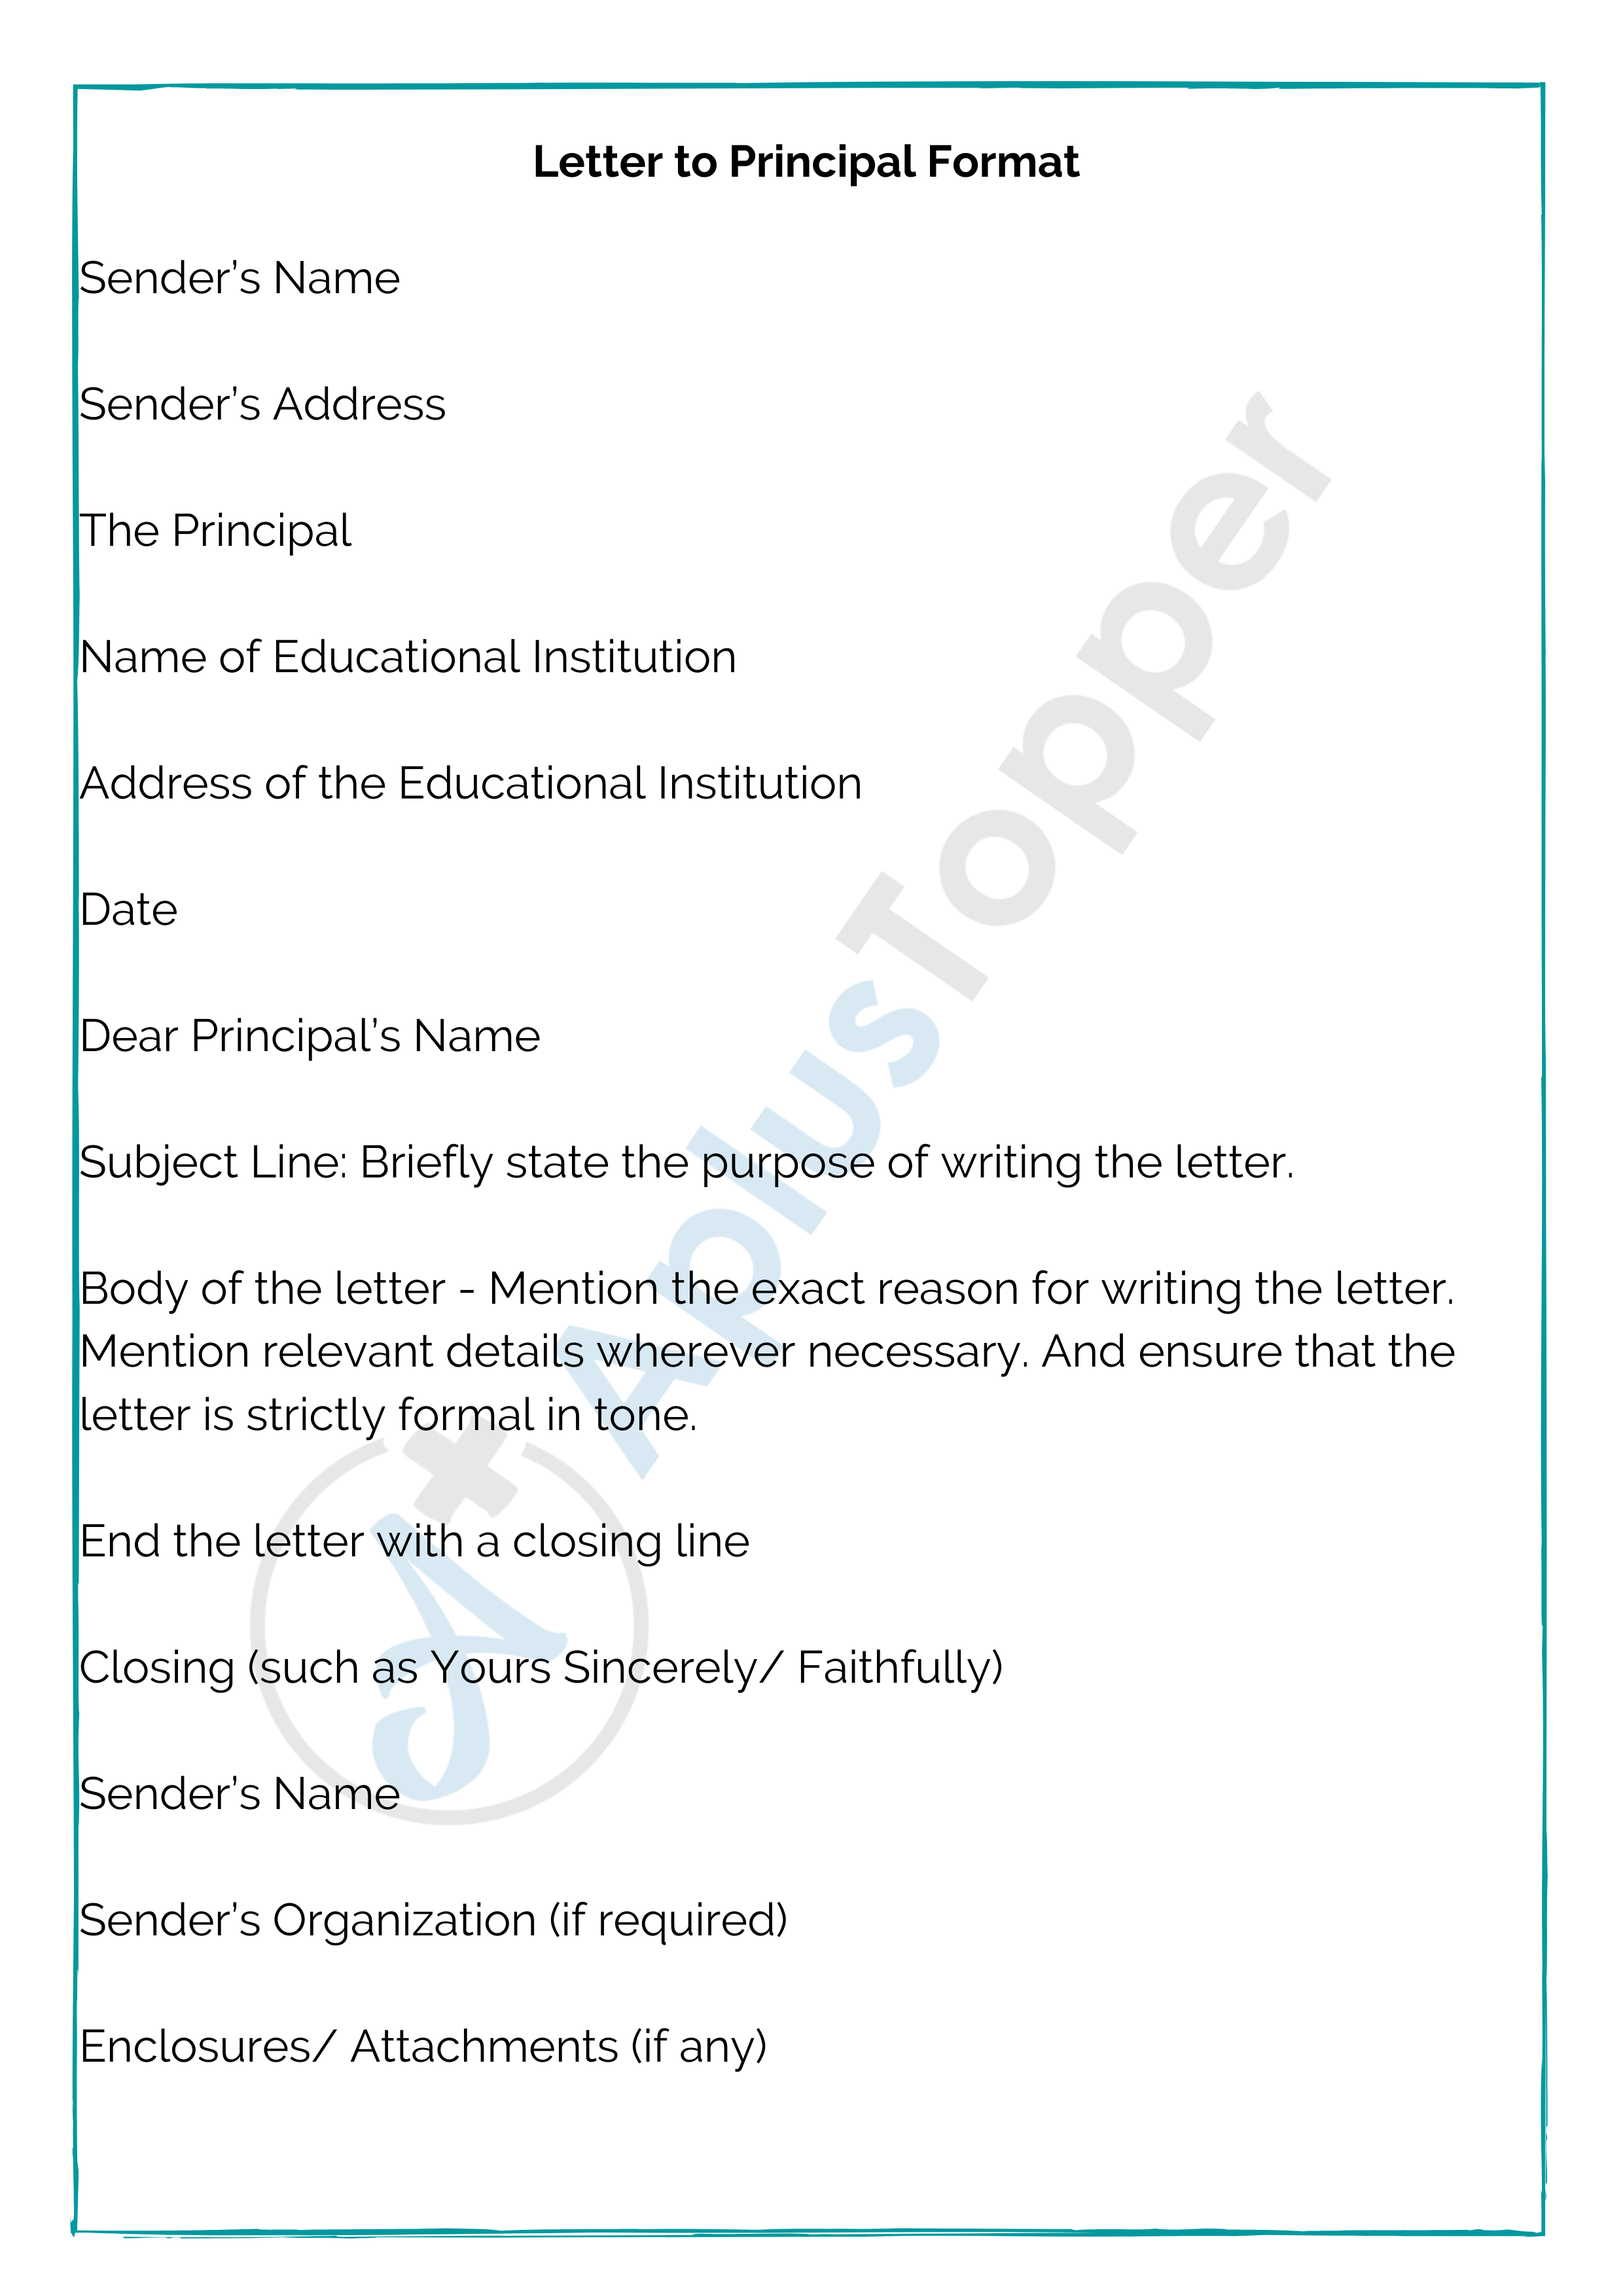 how to write letter to headmaster